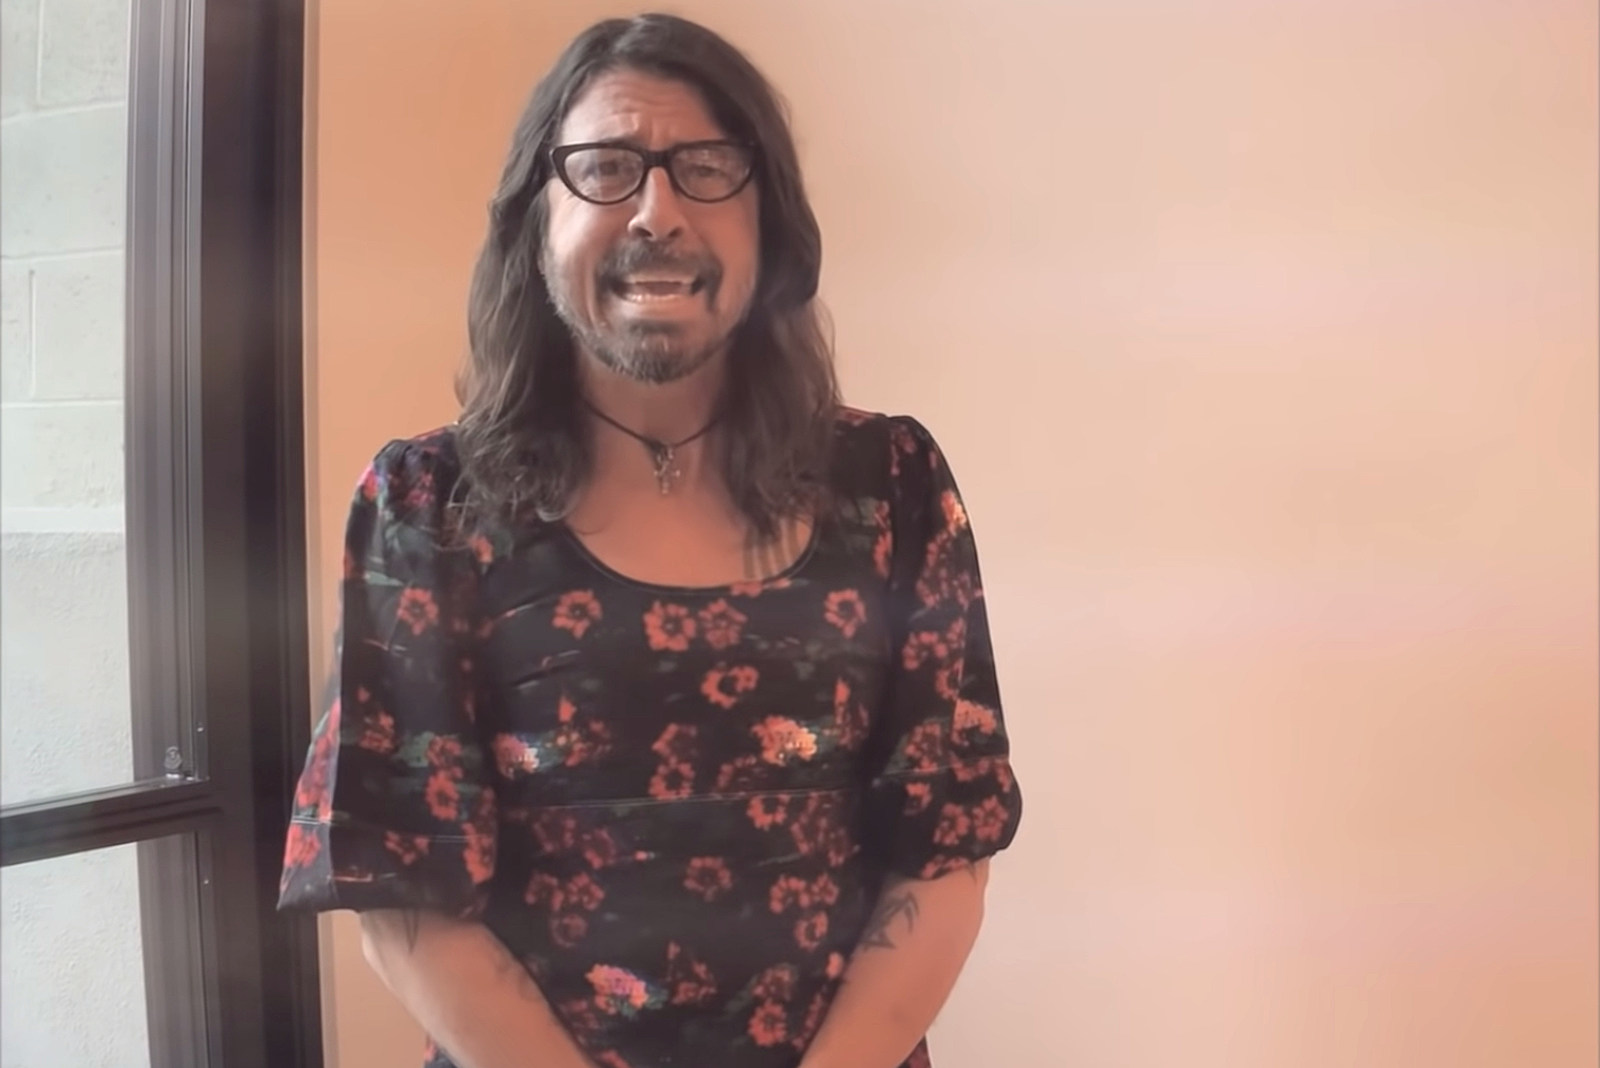 Watch: Dave Grohl’s Death Metal Cover of Lisa Loeb’s ‘Stay’